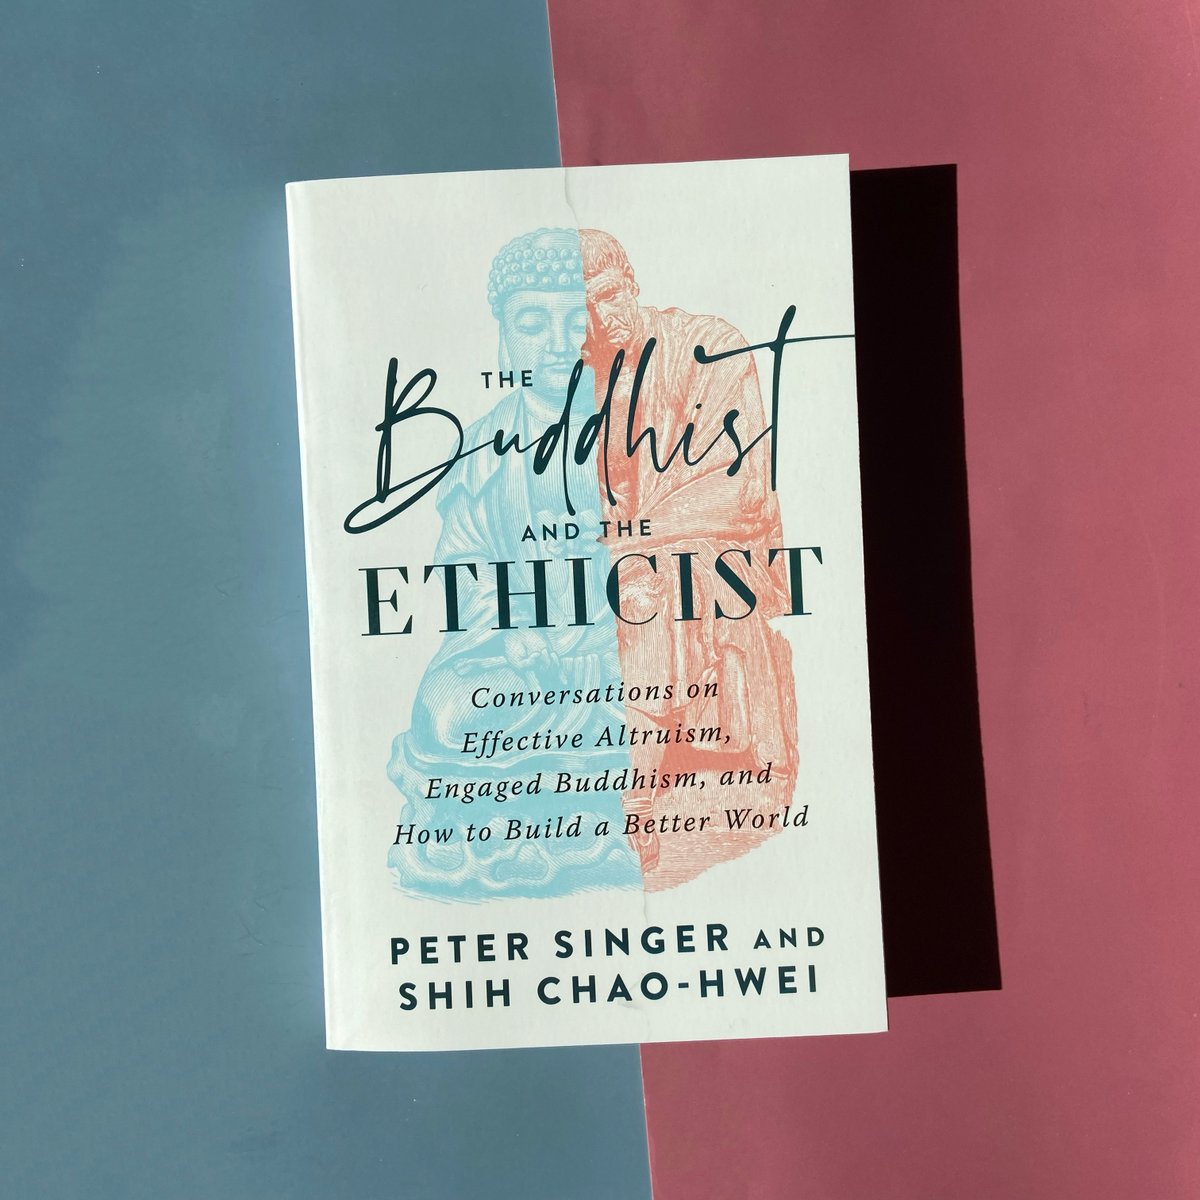 I had the opportunity to explore the intersections between Buddhist philosophy and ethical reasoning on PhilosophyPodcasts.org. We talk about how ancient Buddhist teachings can illuminate and challenge our modern ethical dilemmas, offering insights into creating a more ethical…